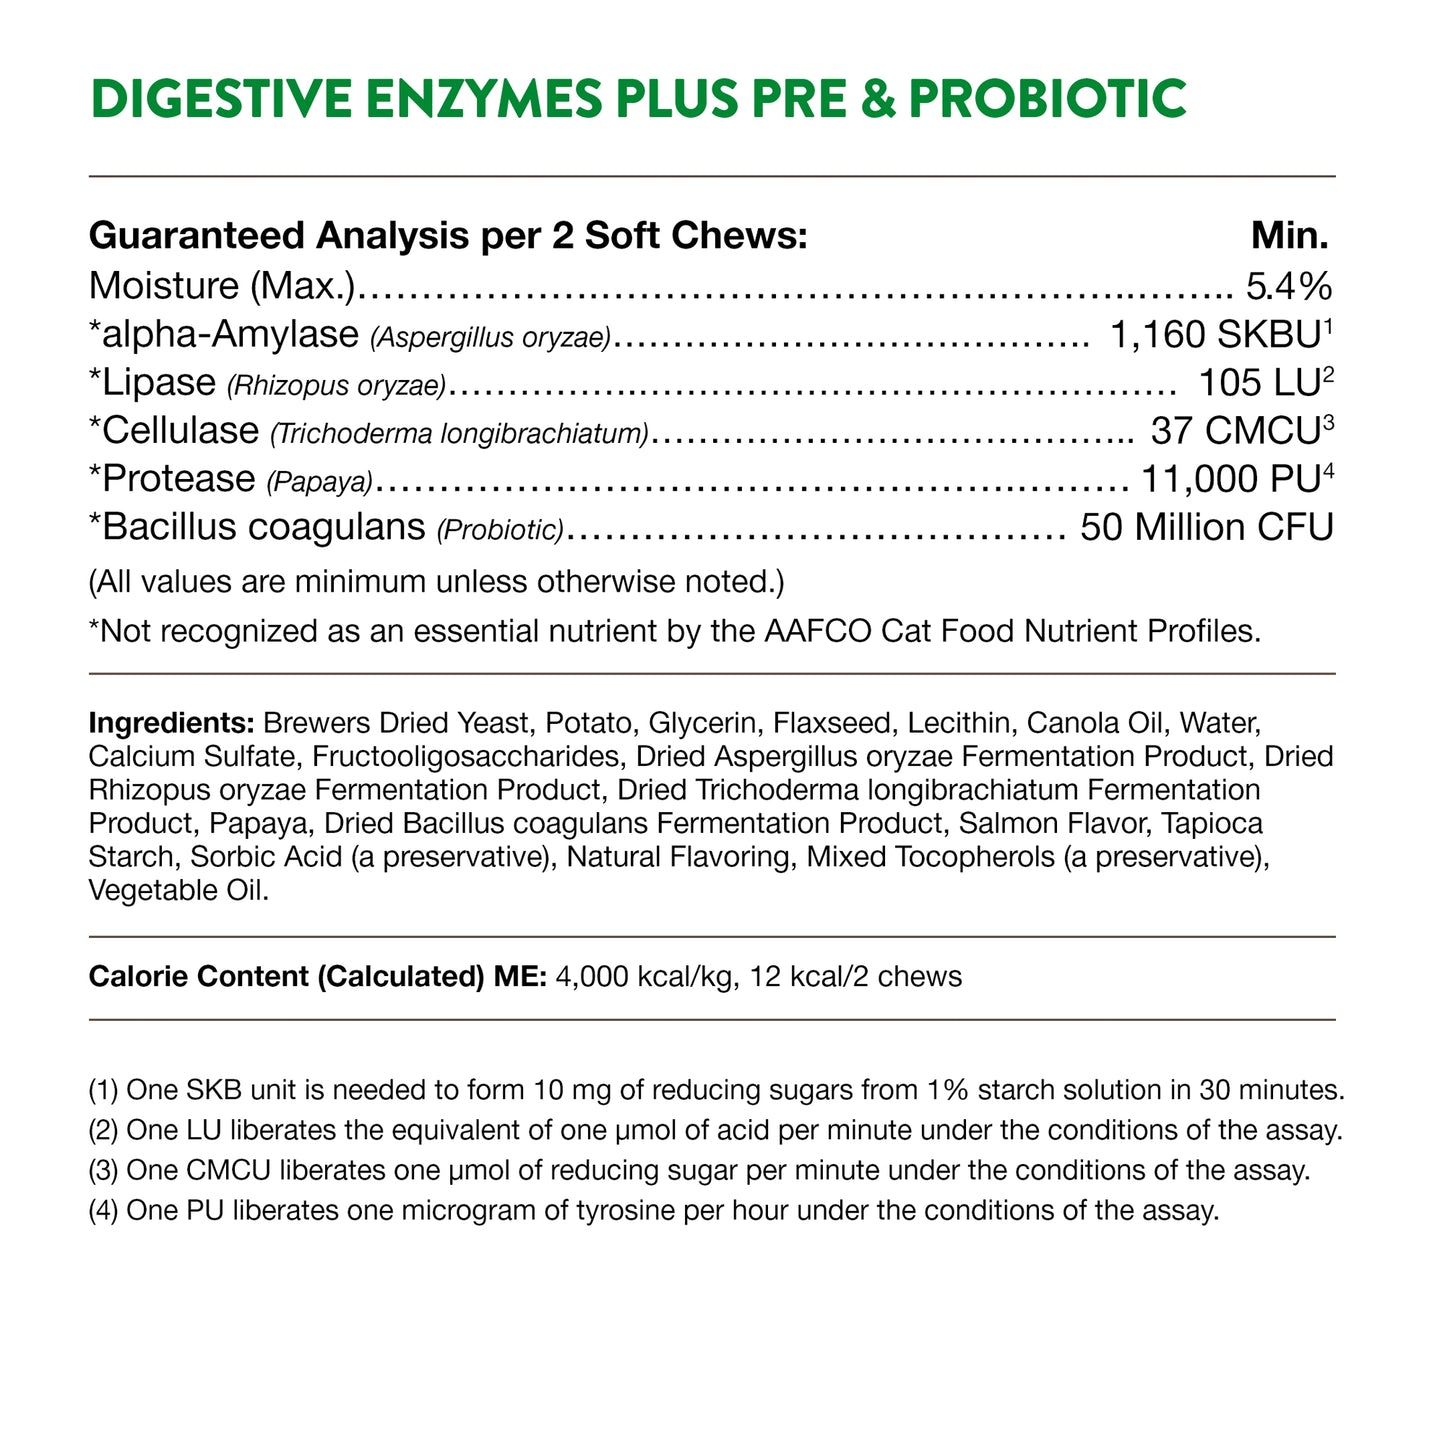 Digestive Enzymes Cat Soft Chews with Prebiotic & Probiotic